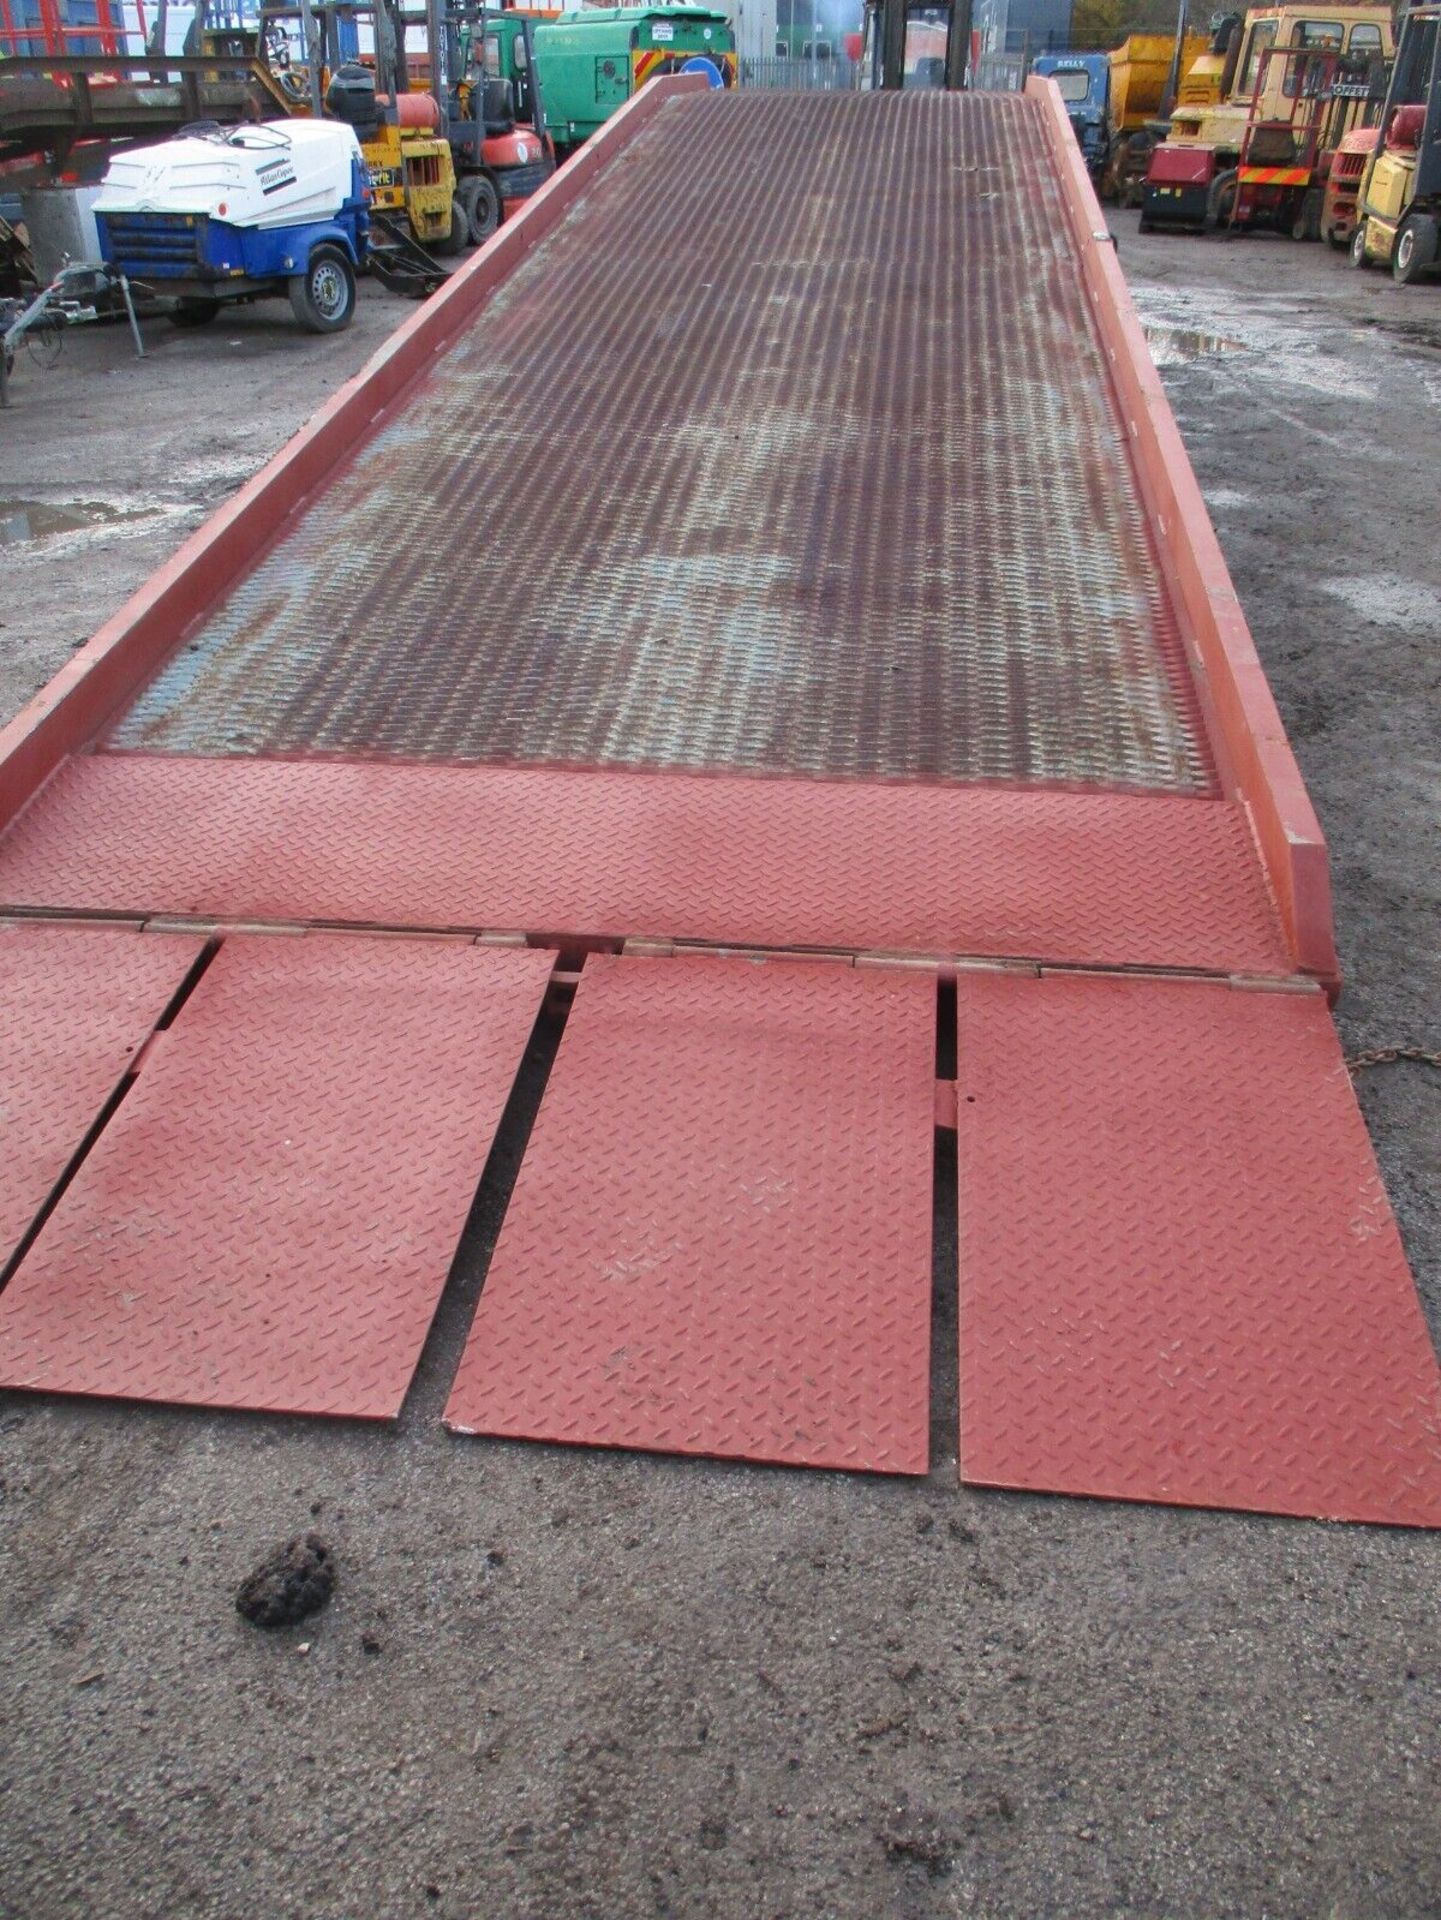 12 METRES LONG THORWORLD CONTAINER LOADING RAMP - Image 4 of 9